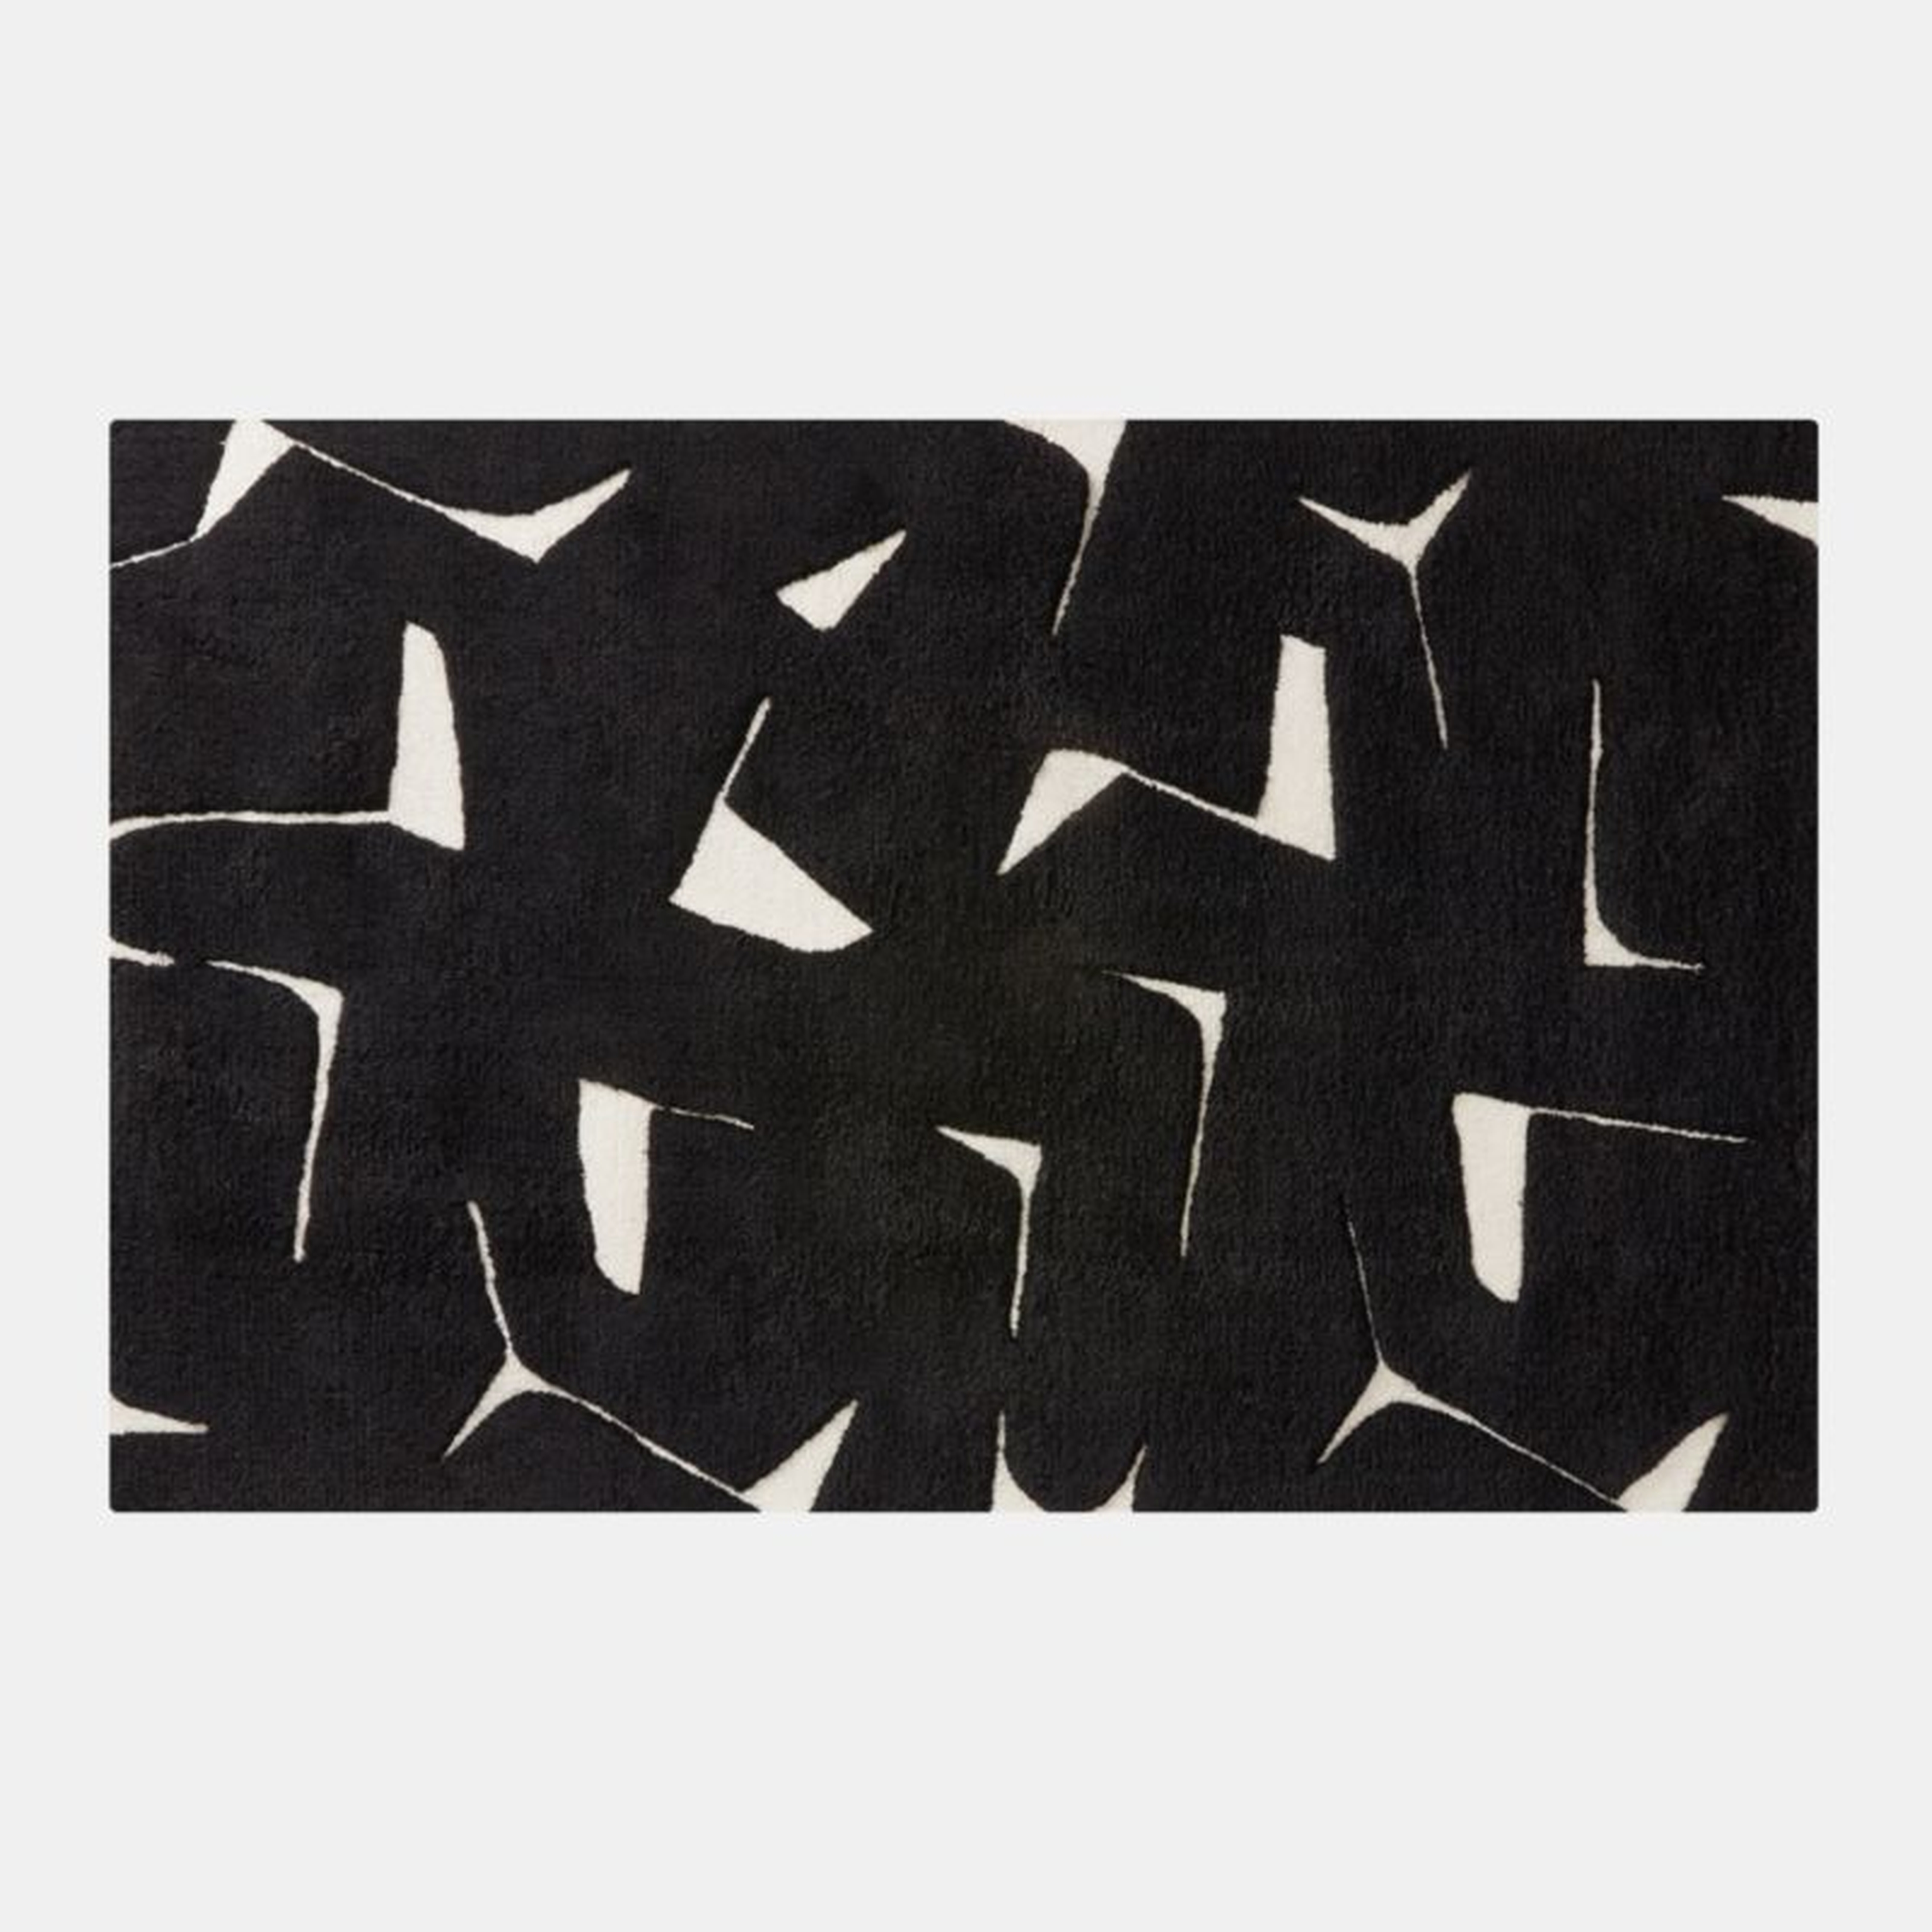 Sway Black and White Tufted Area Rug 8'x10' - CB2